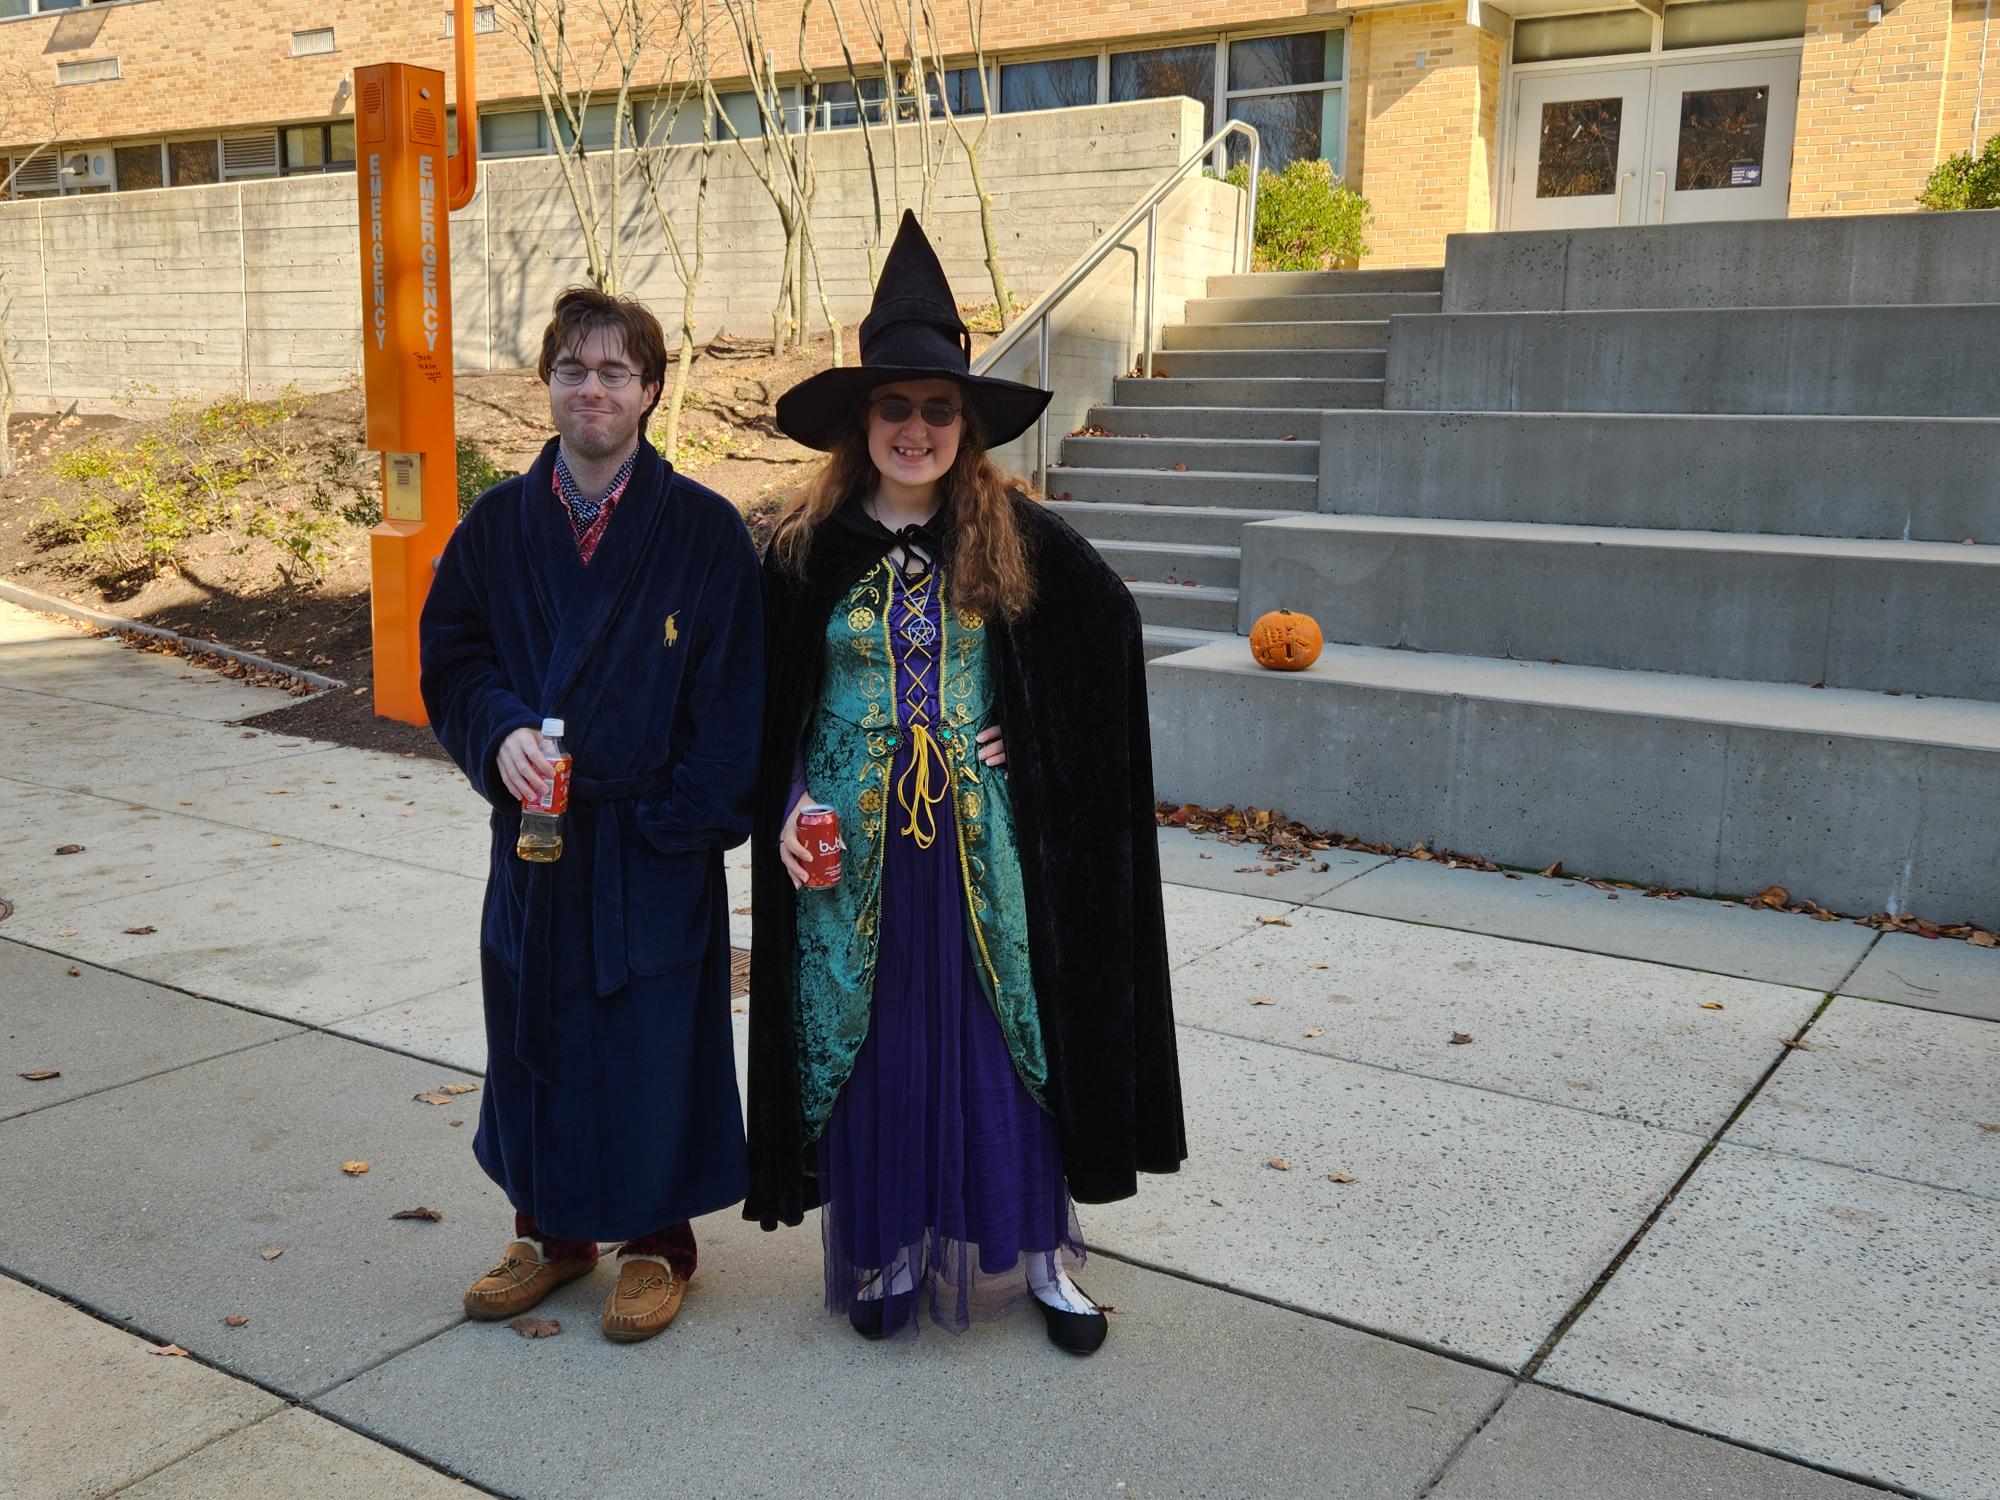 ESA students with Halloween costumes